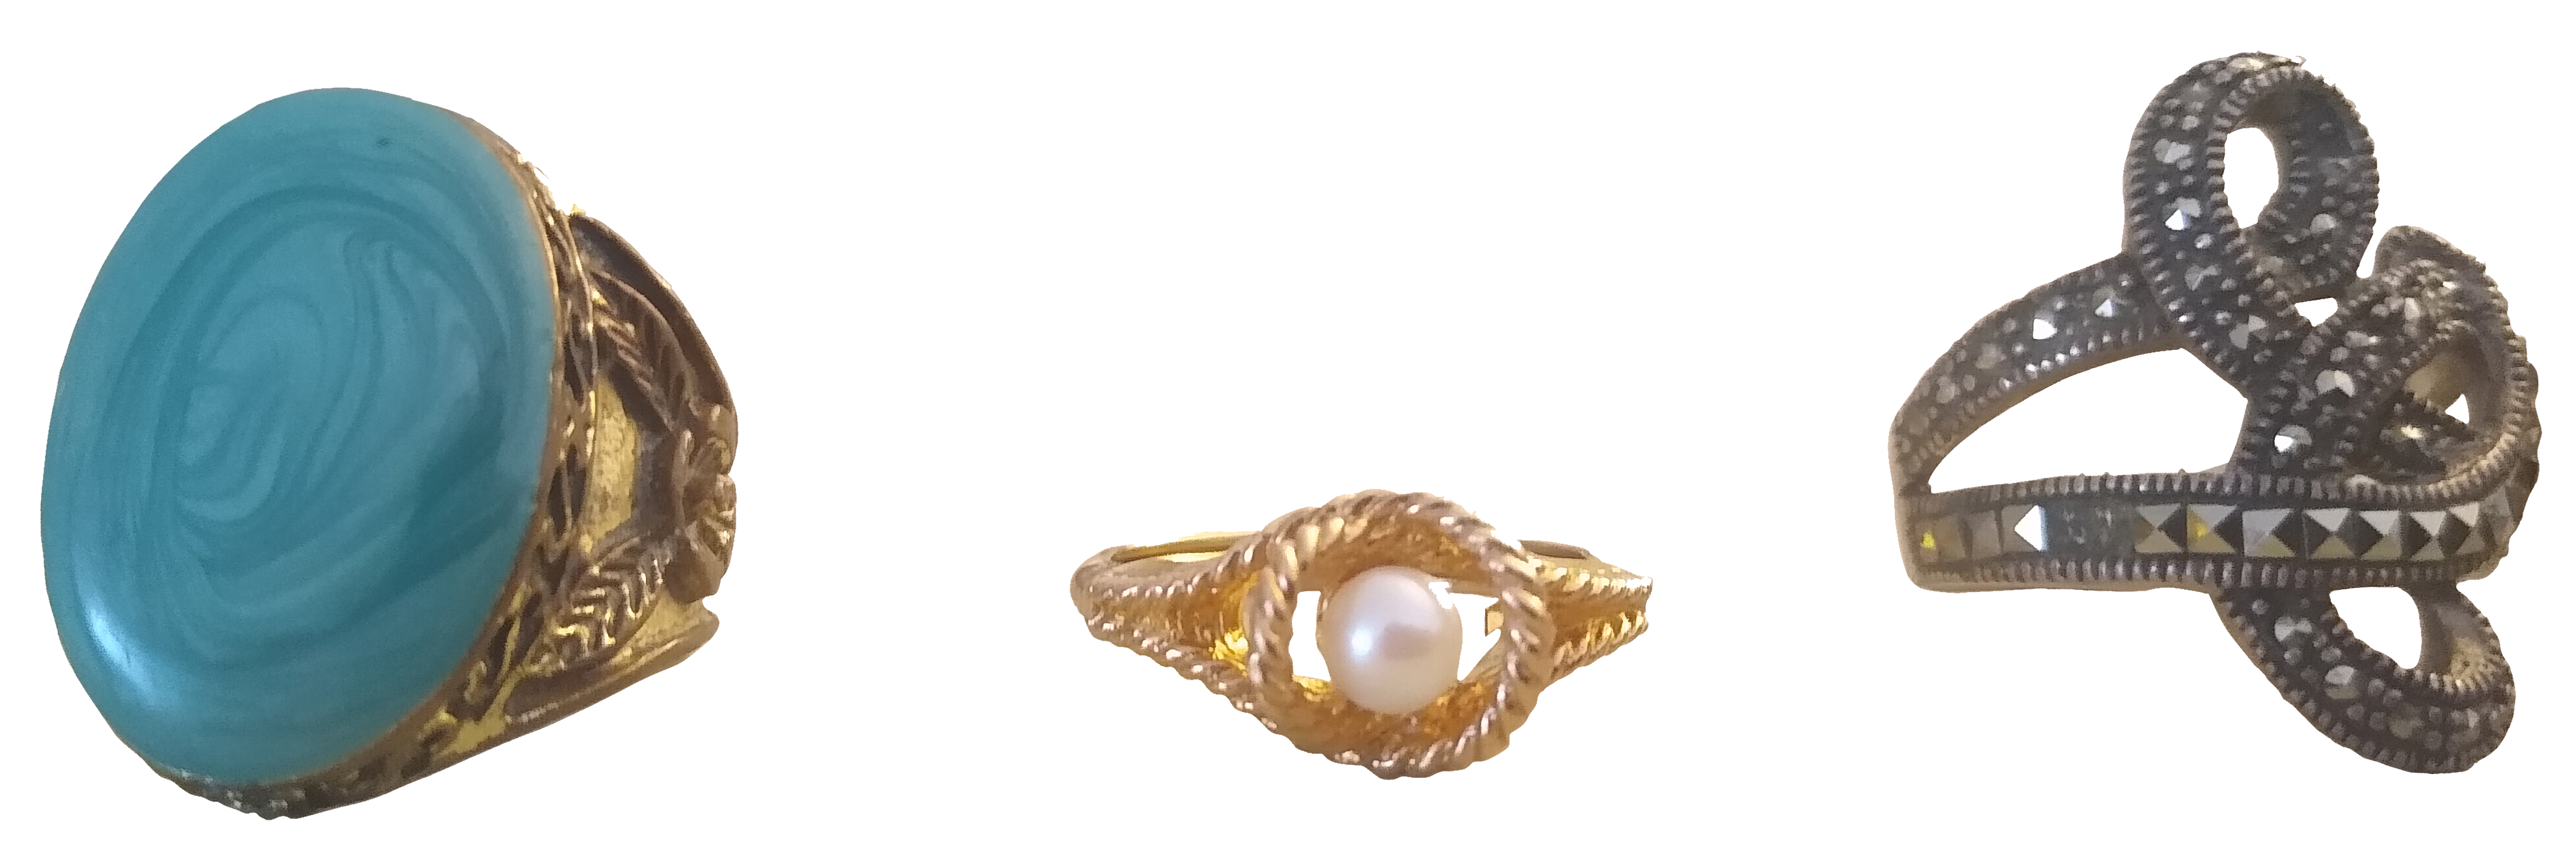 Three rings. A large turquiose gem, a pearl, and a knot ring.